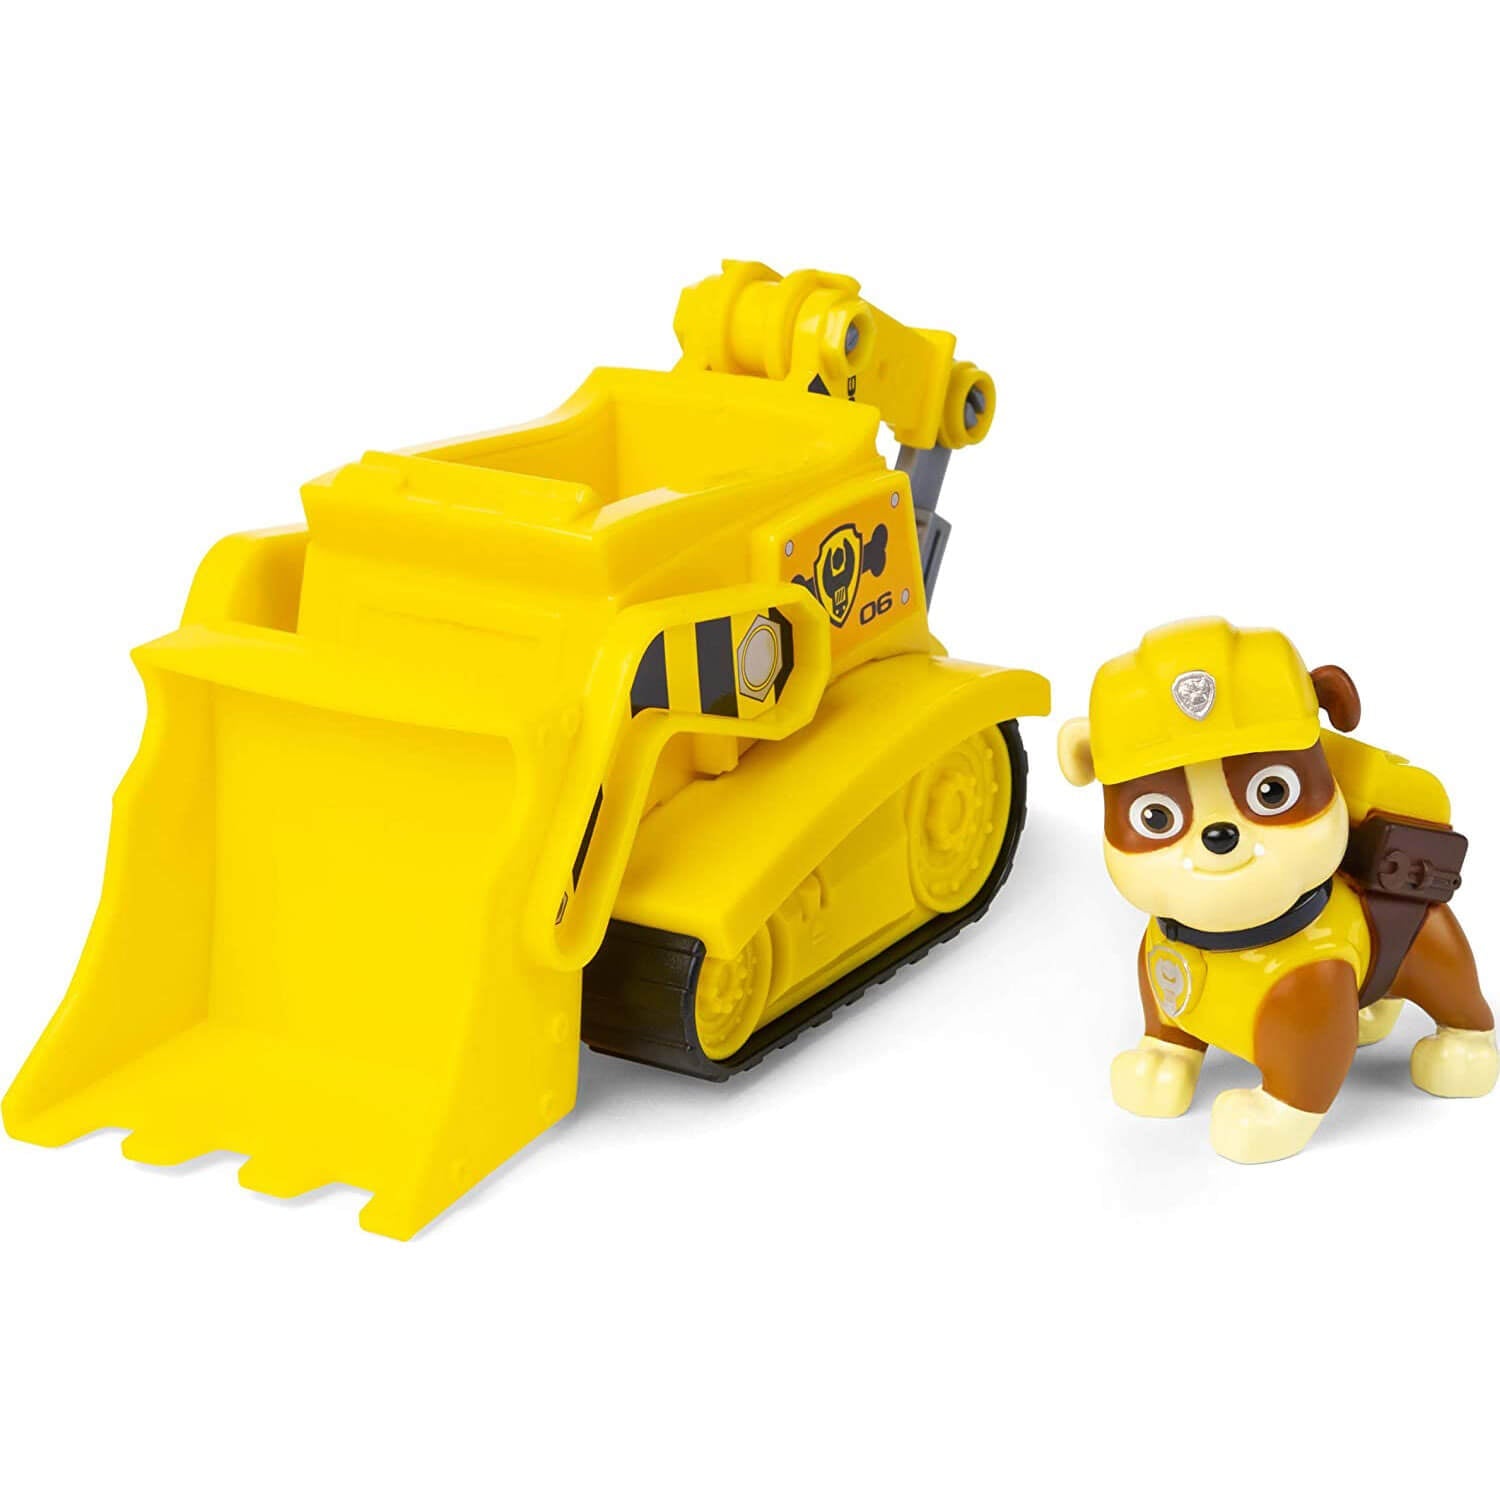 PAW Patrol Rubble's Bulldozer Vehicle with Collectible Figure